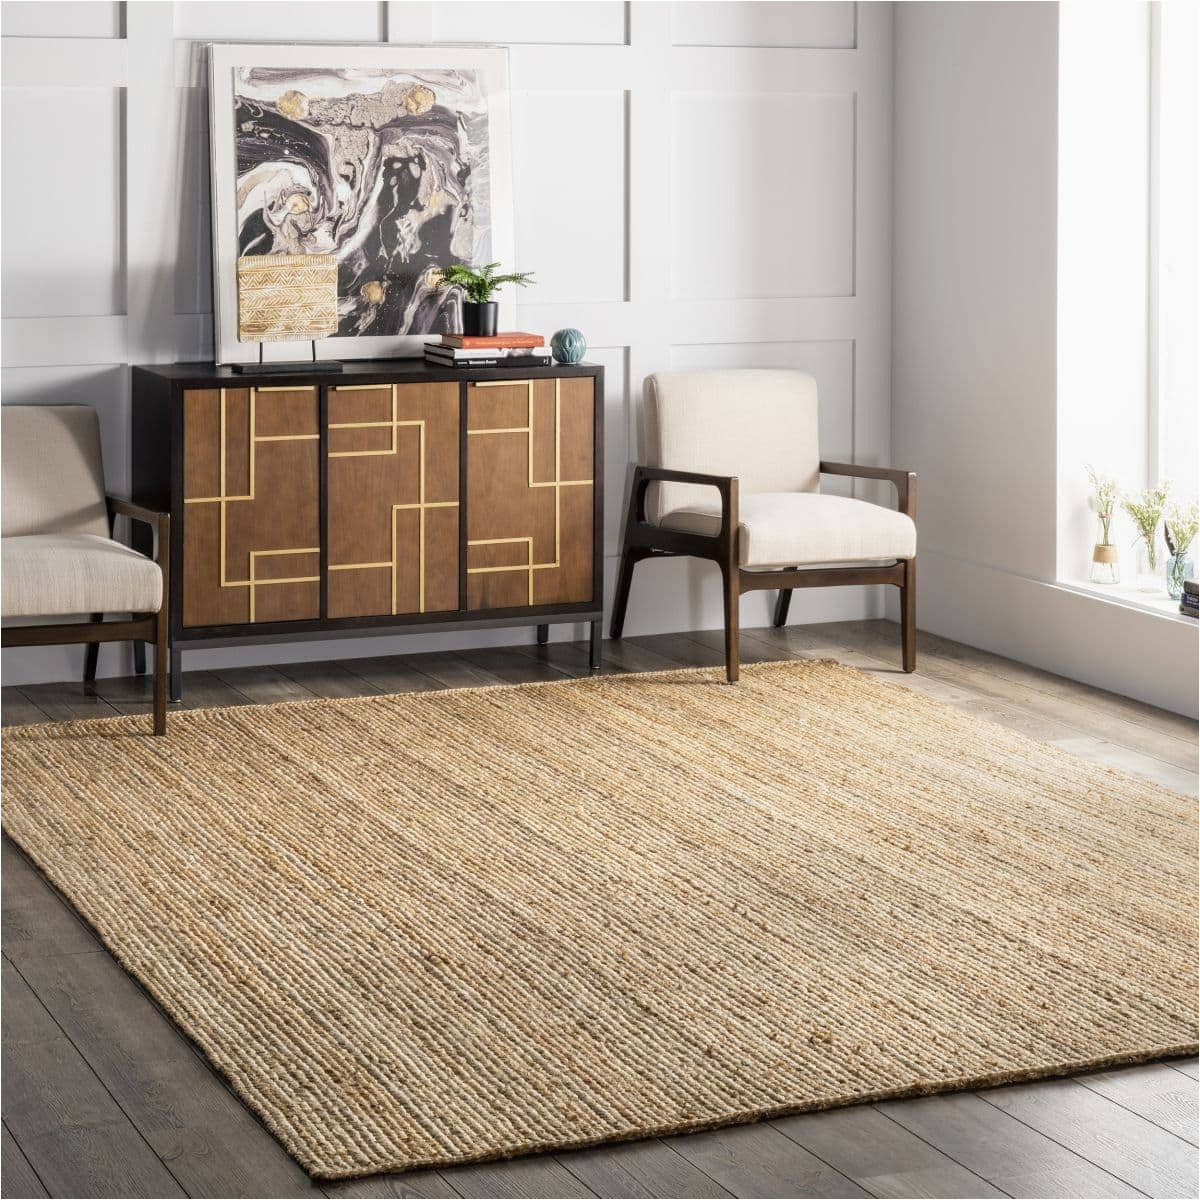 Best Natural Fiber Rug for High Traffic areas 10 Best Rugs for High Traffic areas